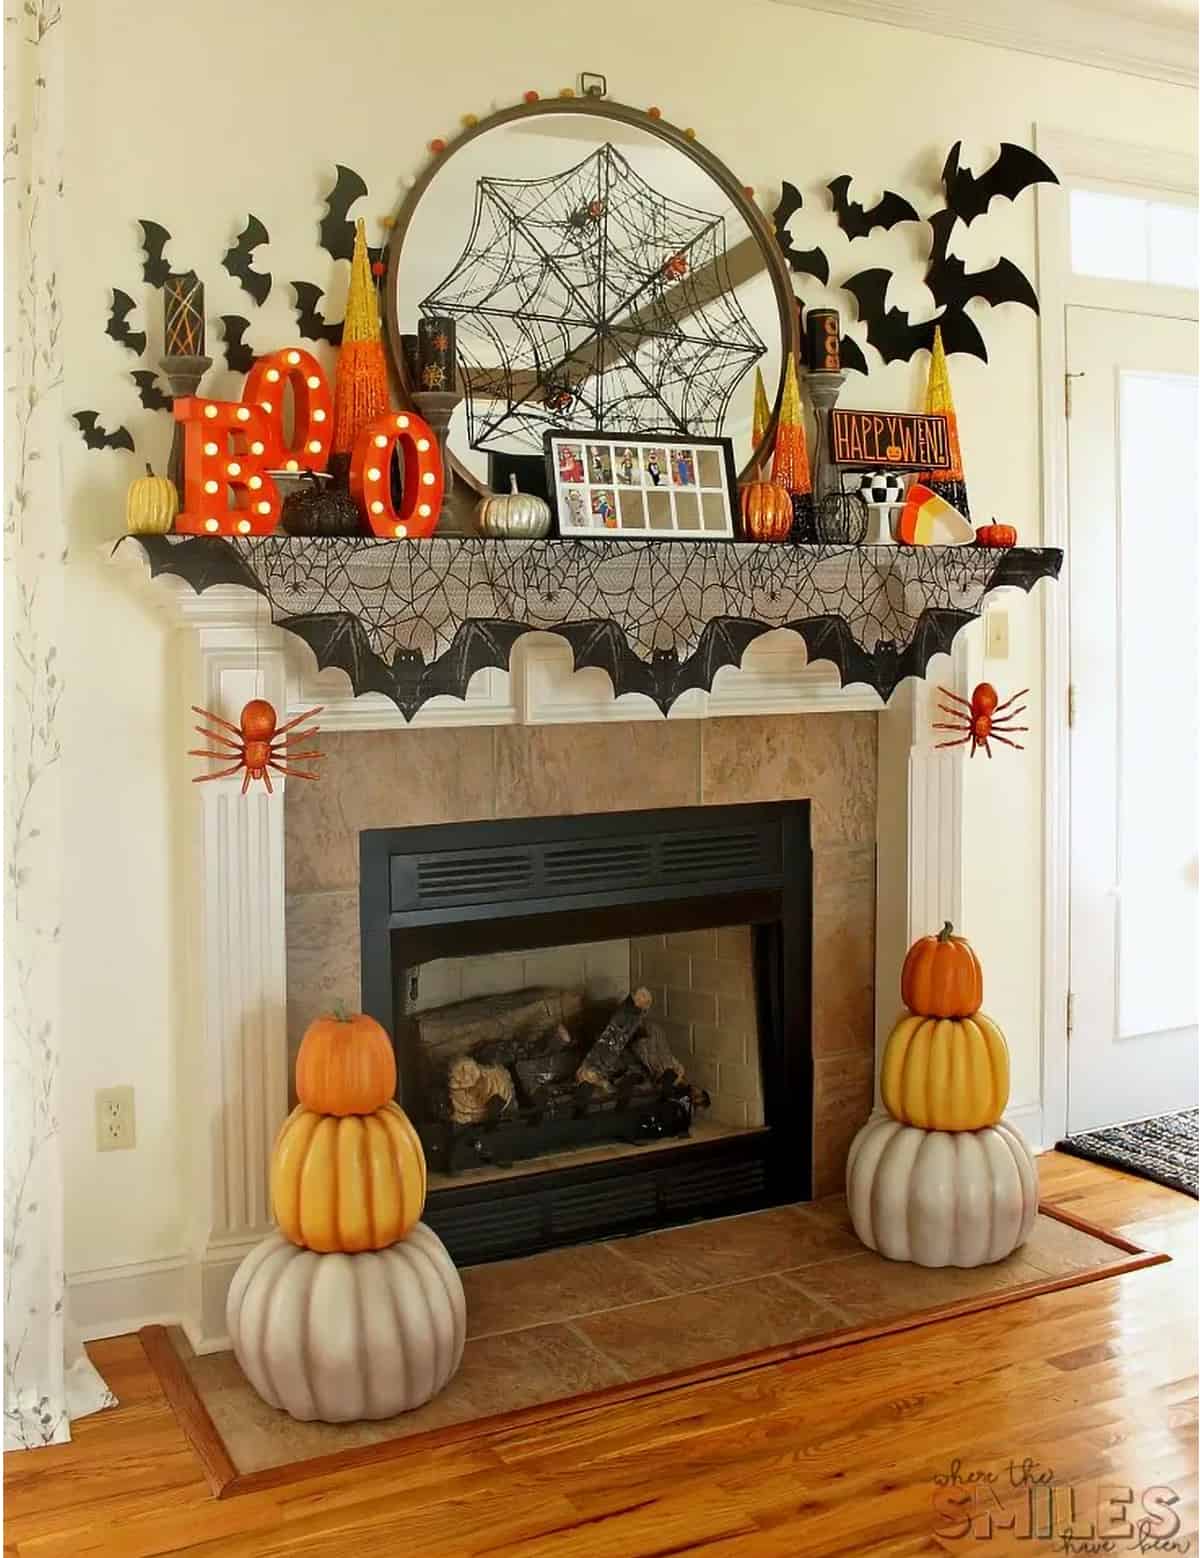 Colorful layered Halloween mantel with BOO sign, candy corn, bat garland, and orange pumpkin topiaries.